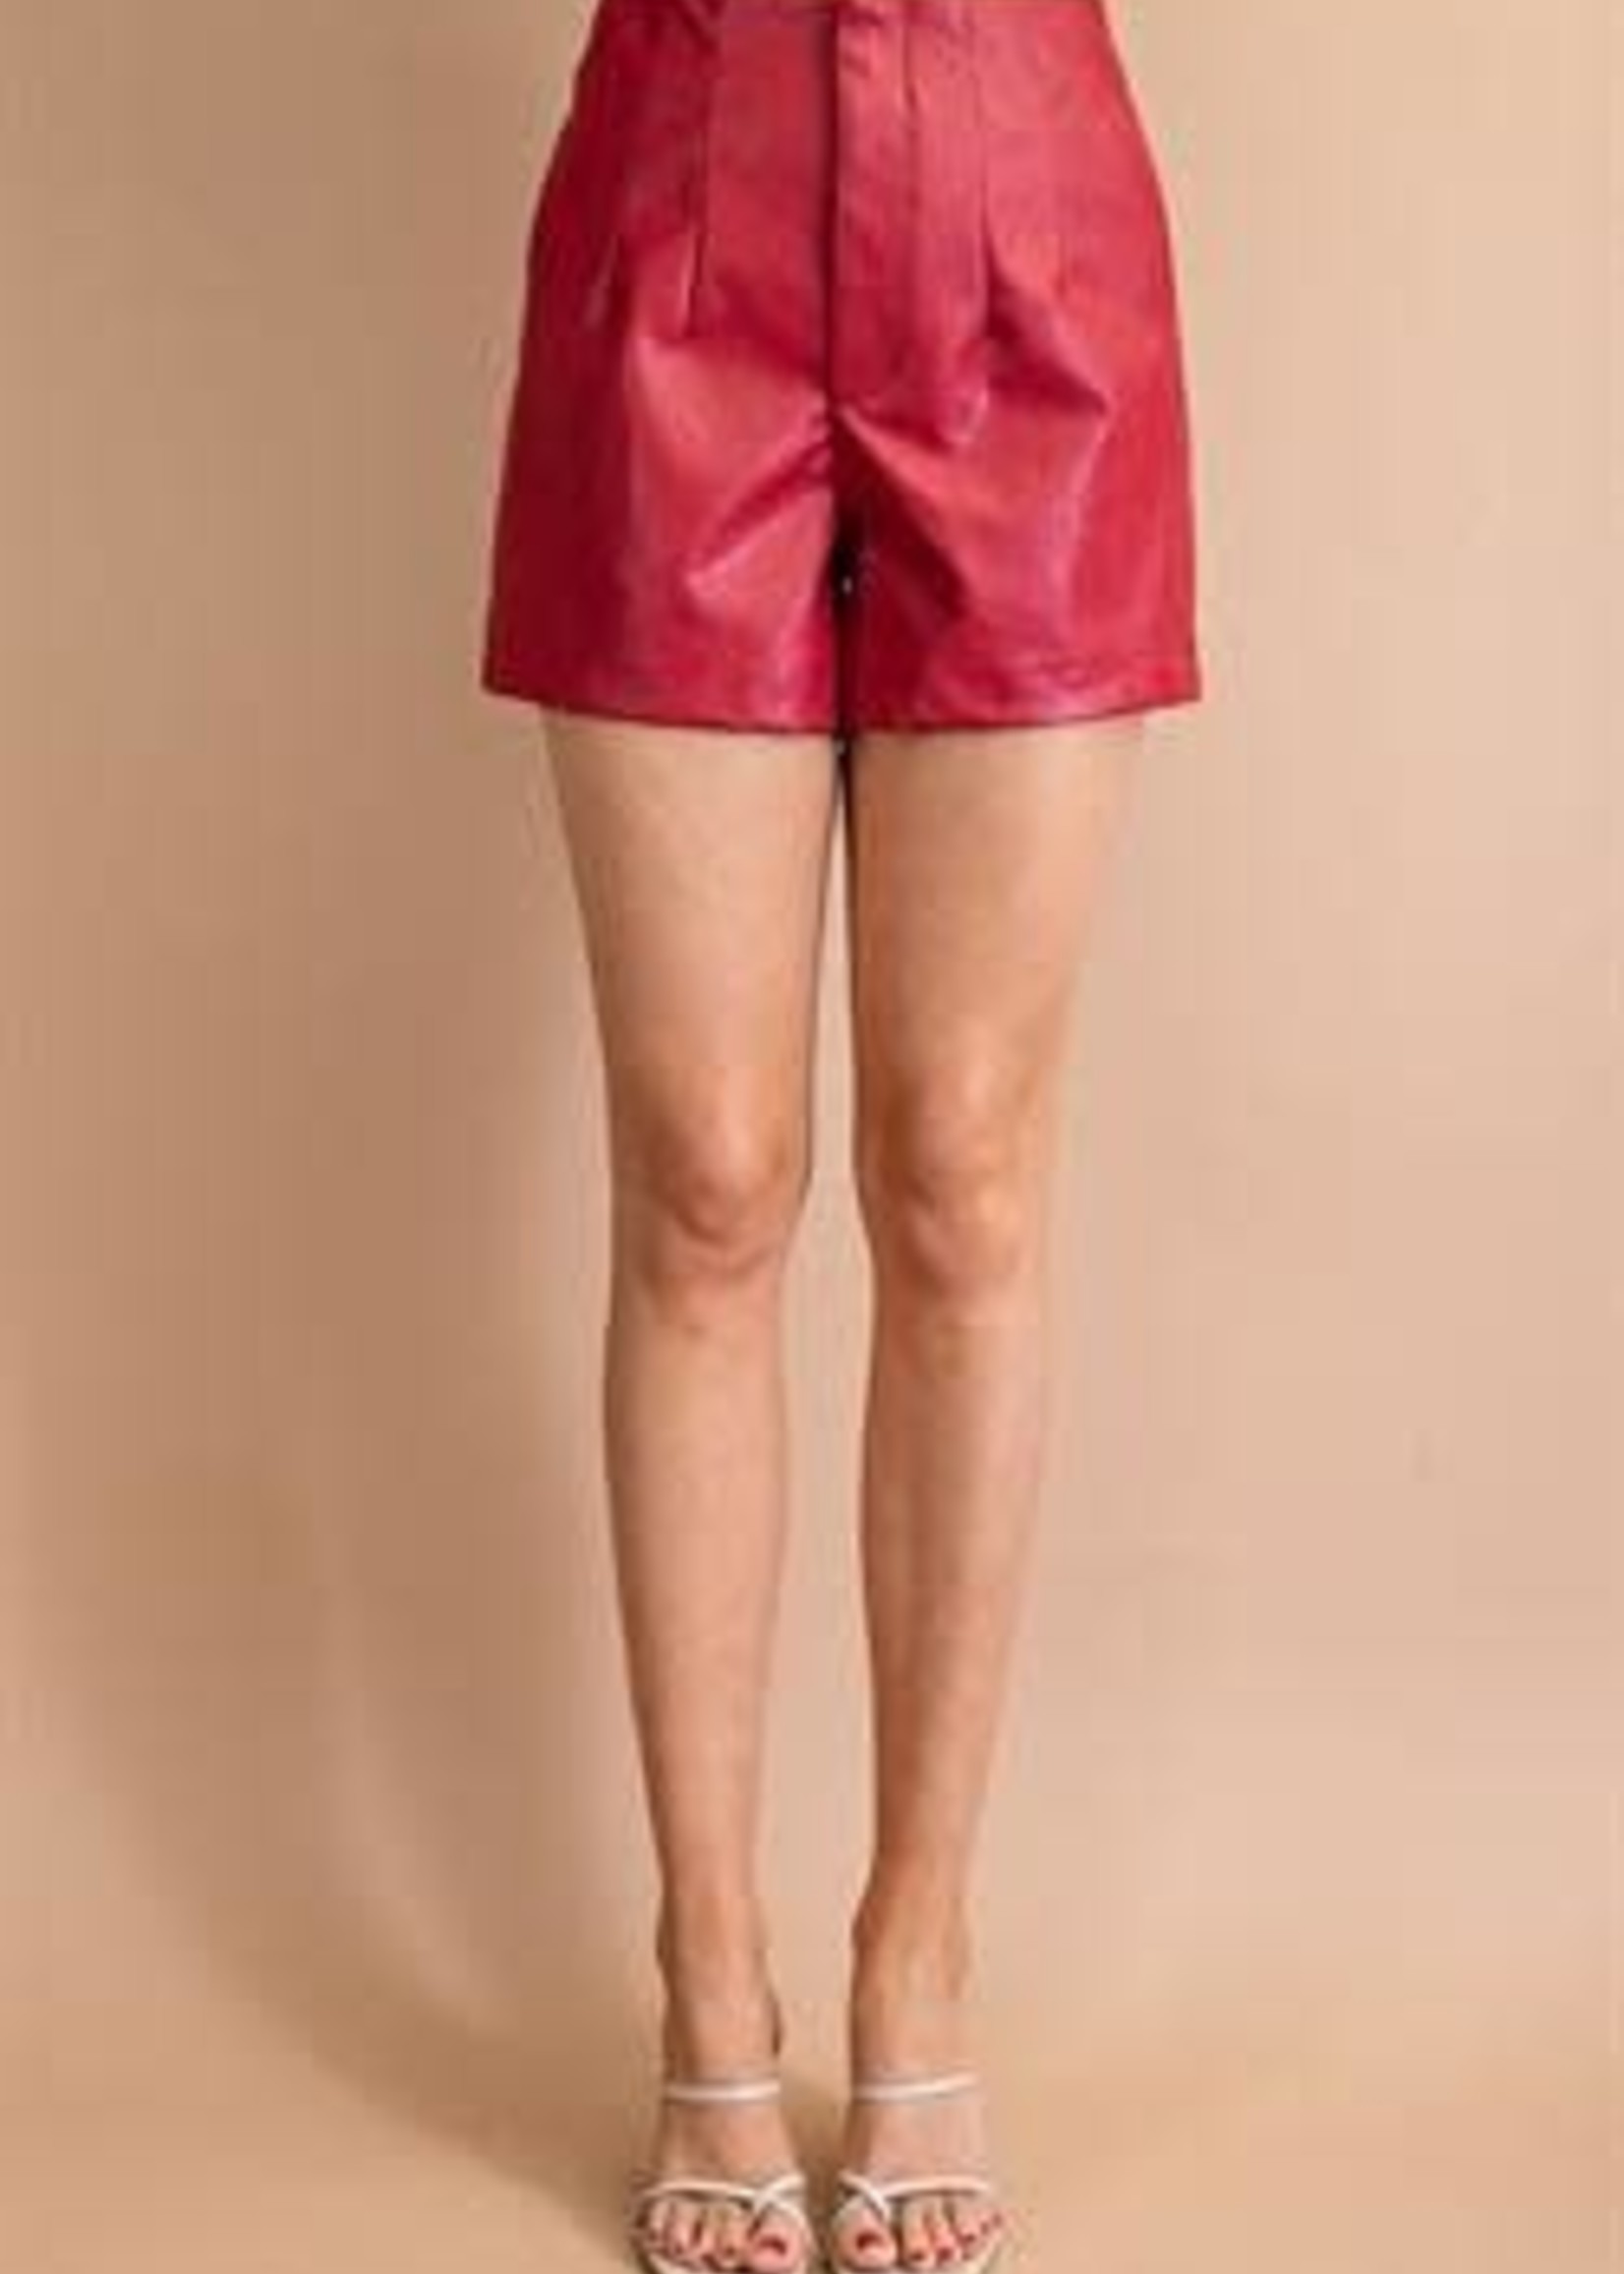 Red Leather Shorts